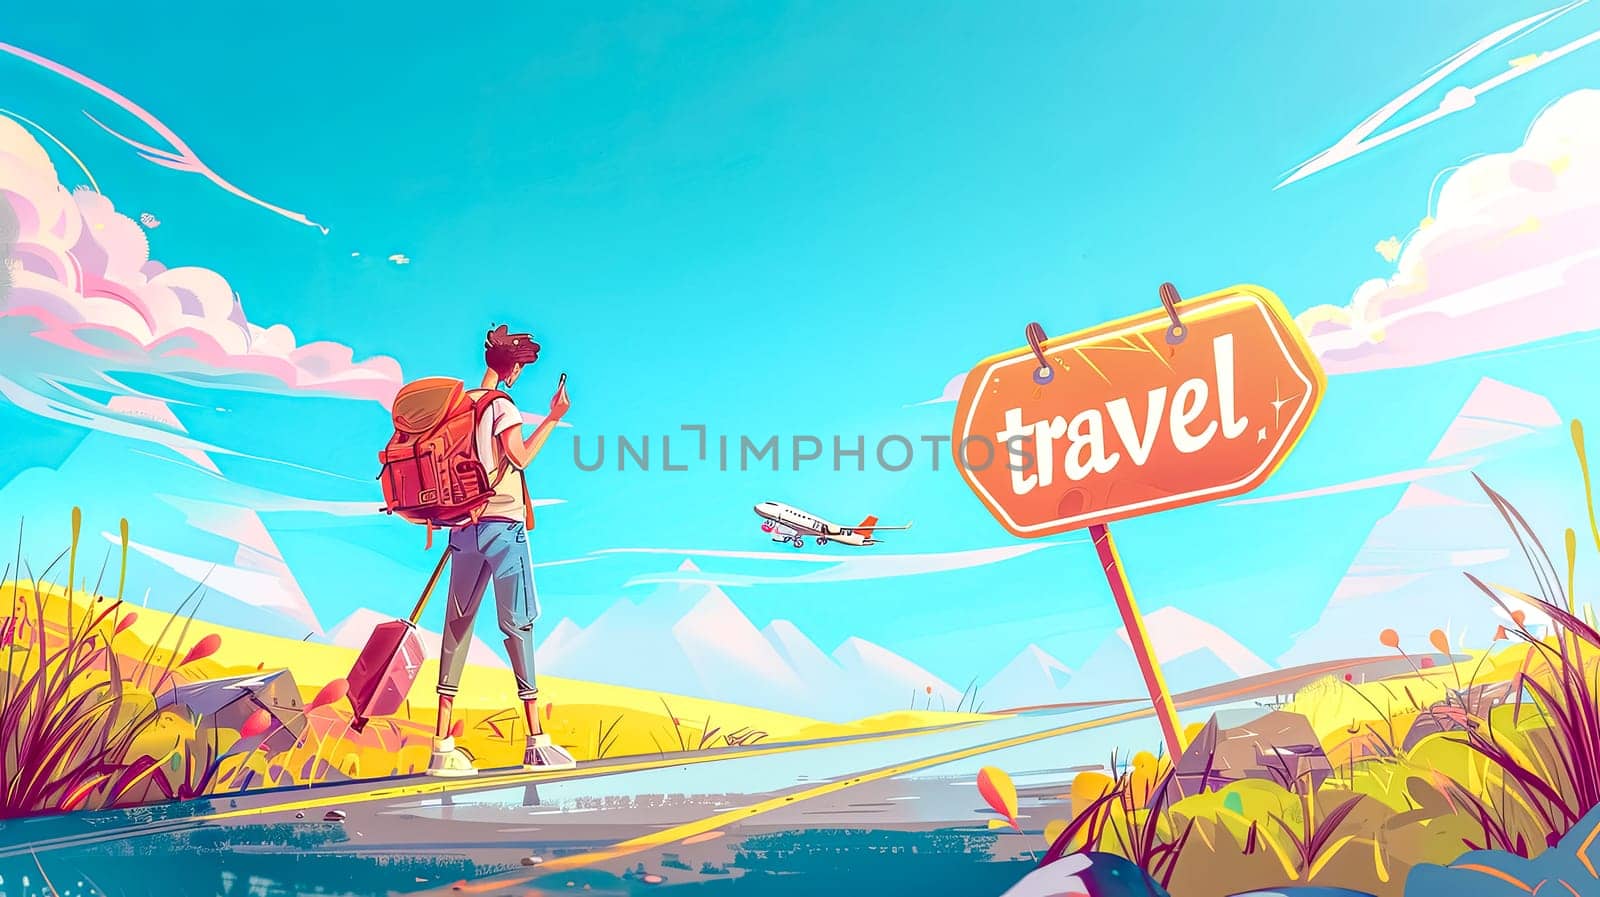 Adventure awaits at sunset - traveler with backpack by Edophoto